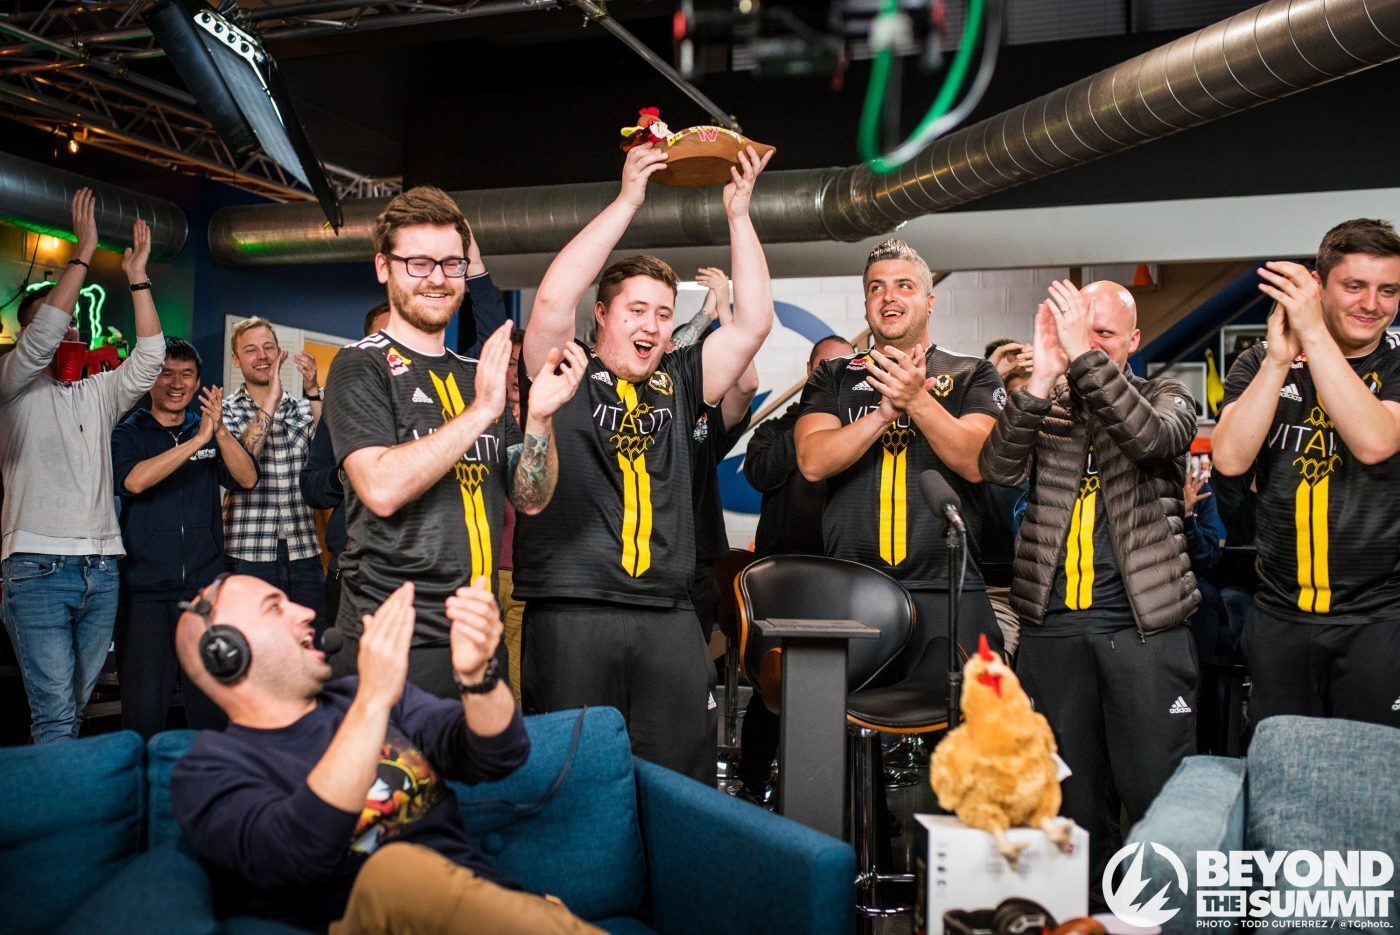 Vitality was the first-place CS:GO team at the entertaining cs_summit 4. (Image courtesy of Beyond the Summit